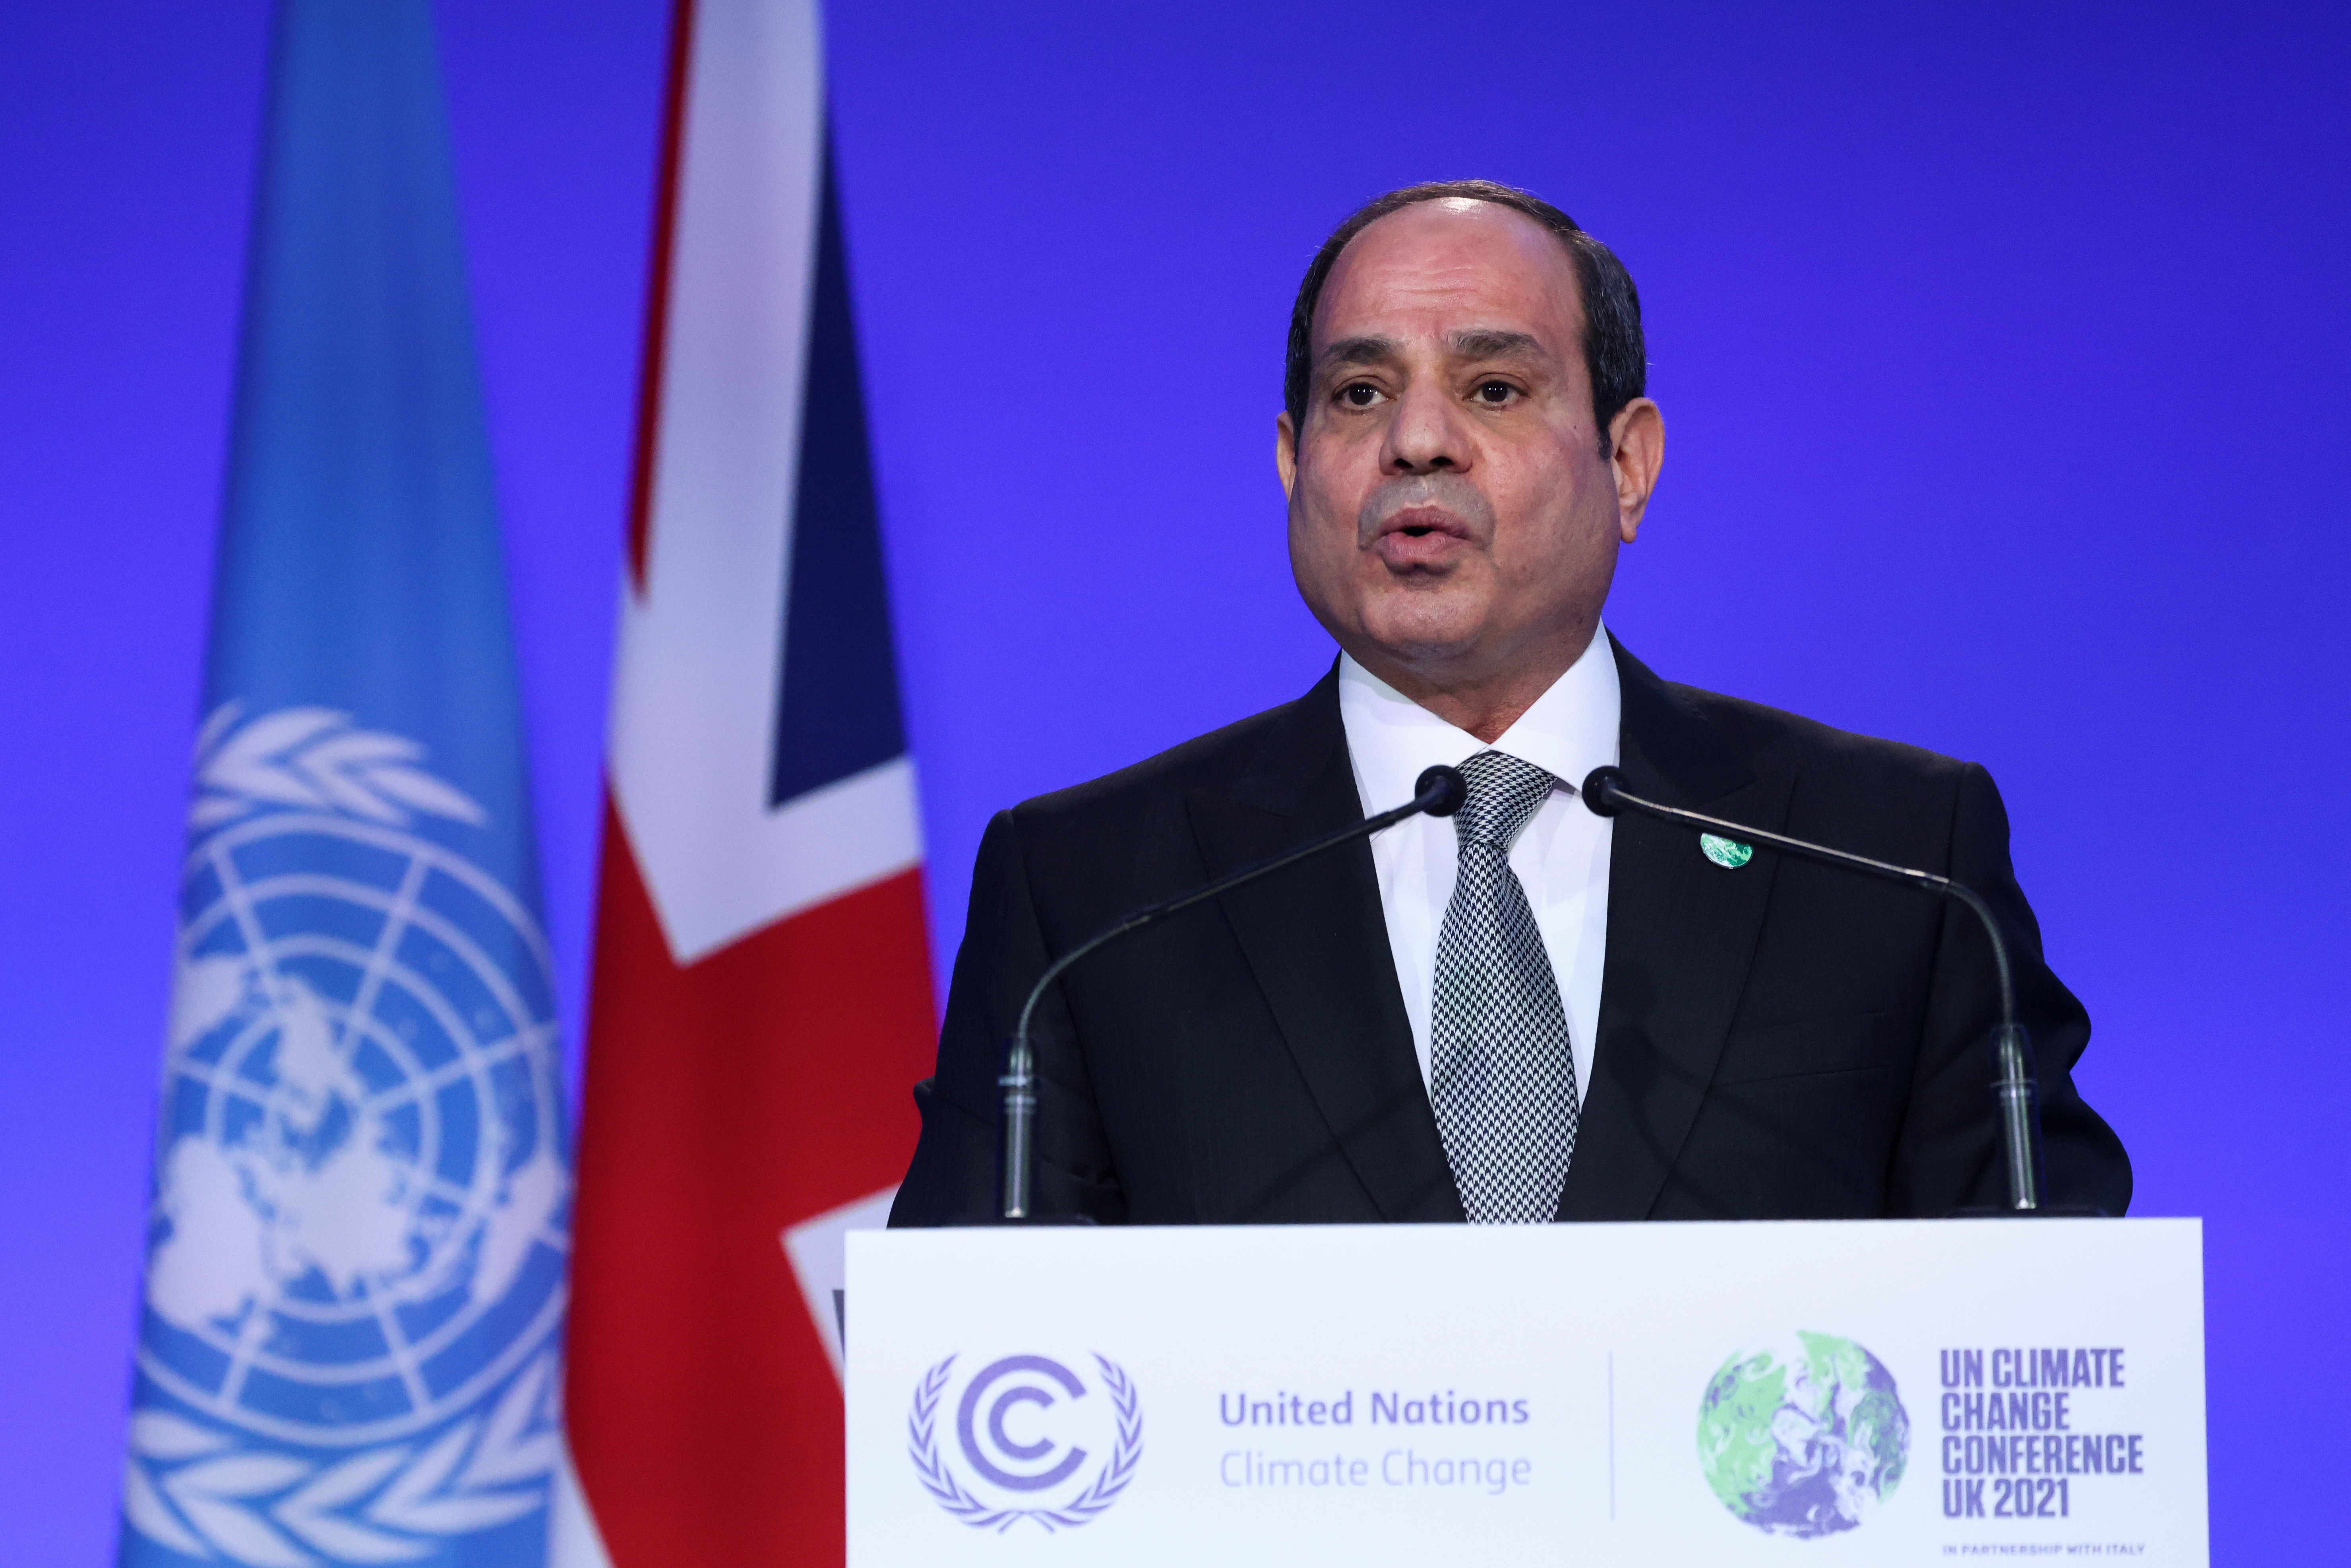 Egypt's President Abdel Fattah al-Sisi speaks during the UN Climate Change Conference (COP26) in Glasgow